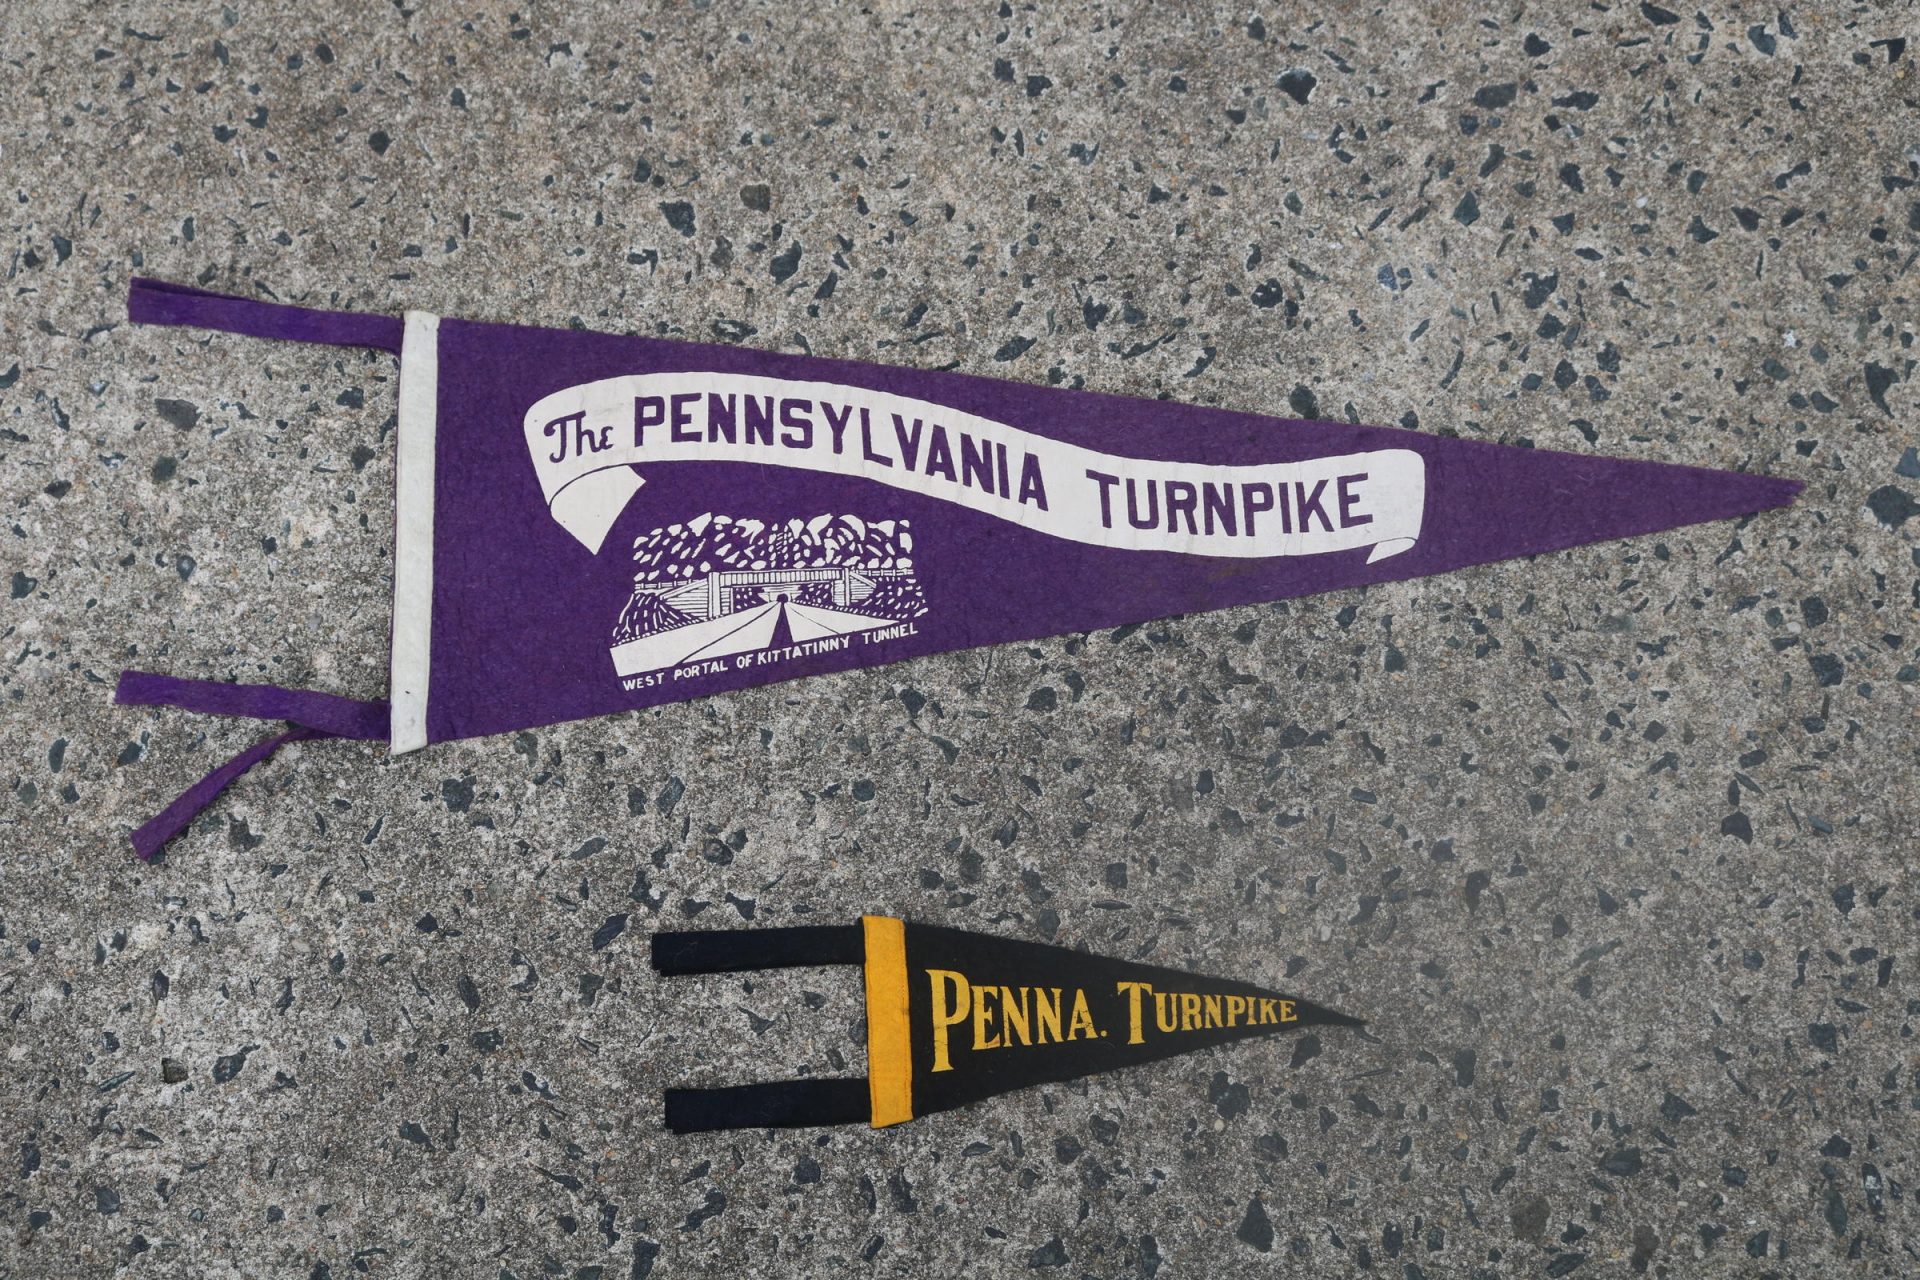 A pennet for the Pennsylvania Turnpike.